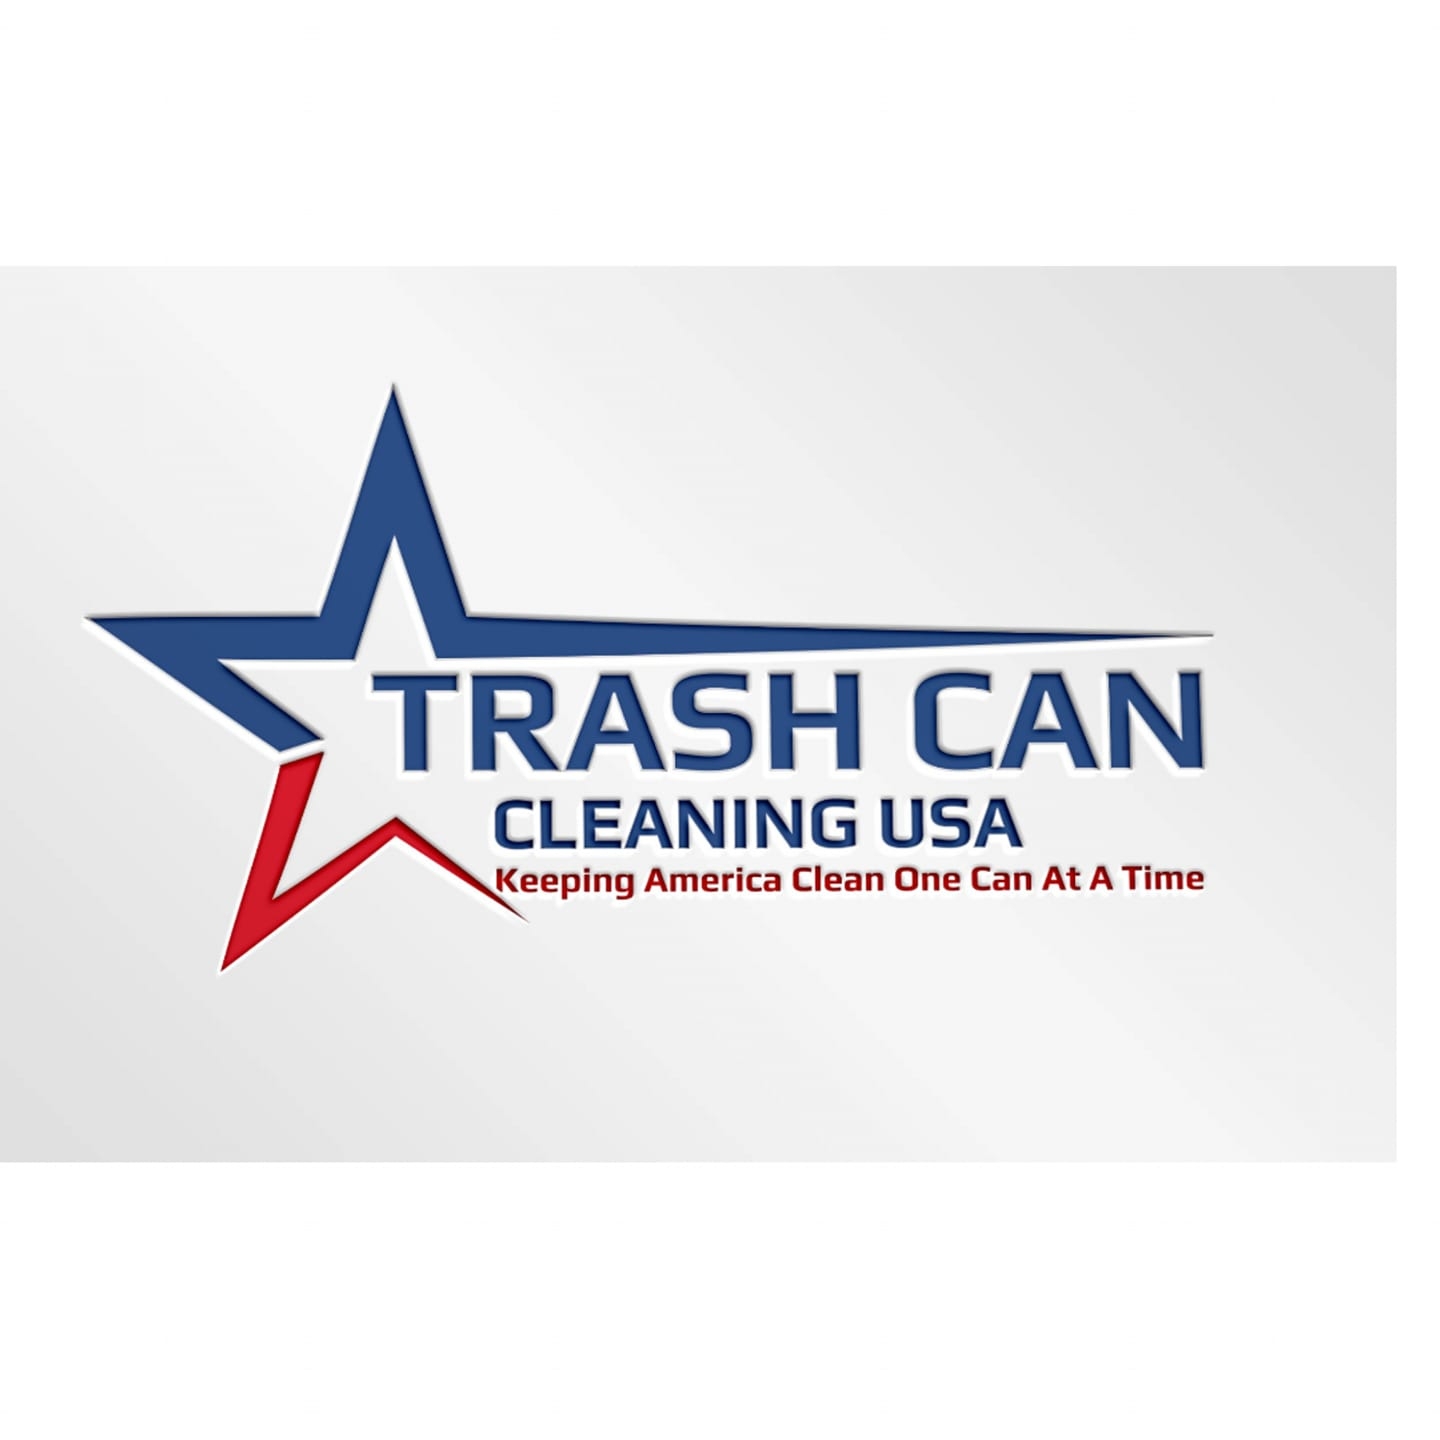 Trash Can Cleaning logo